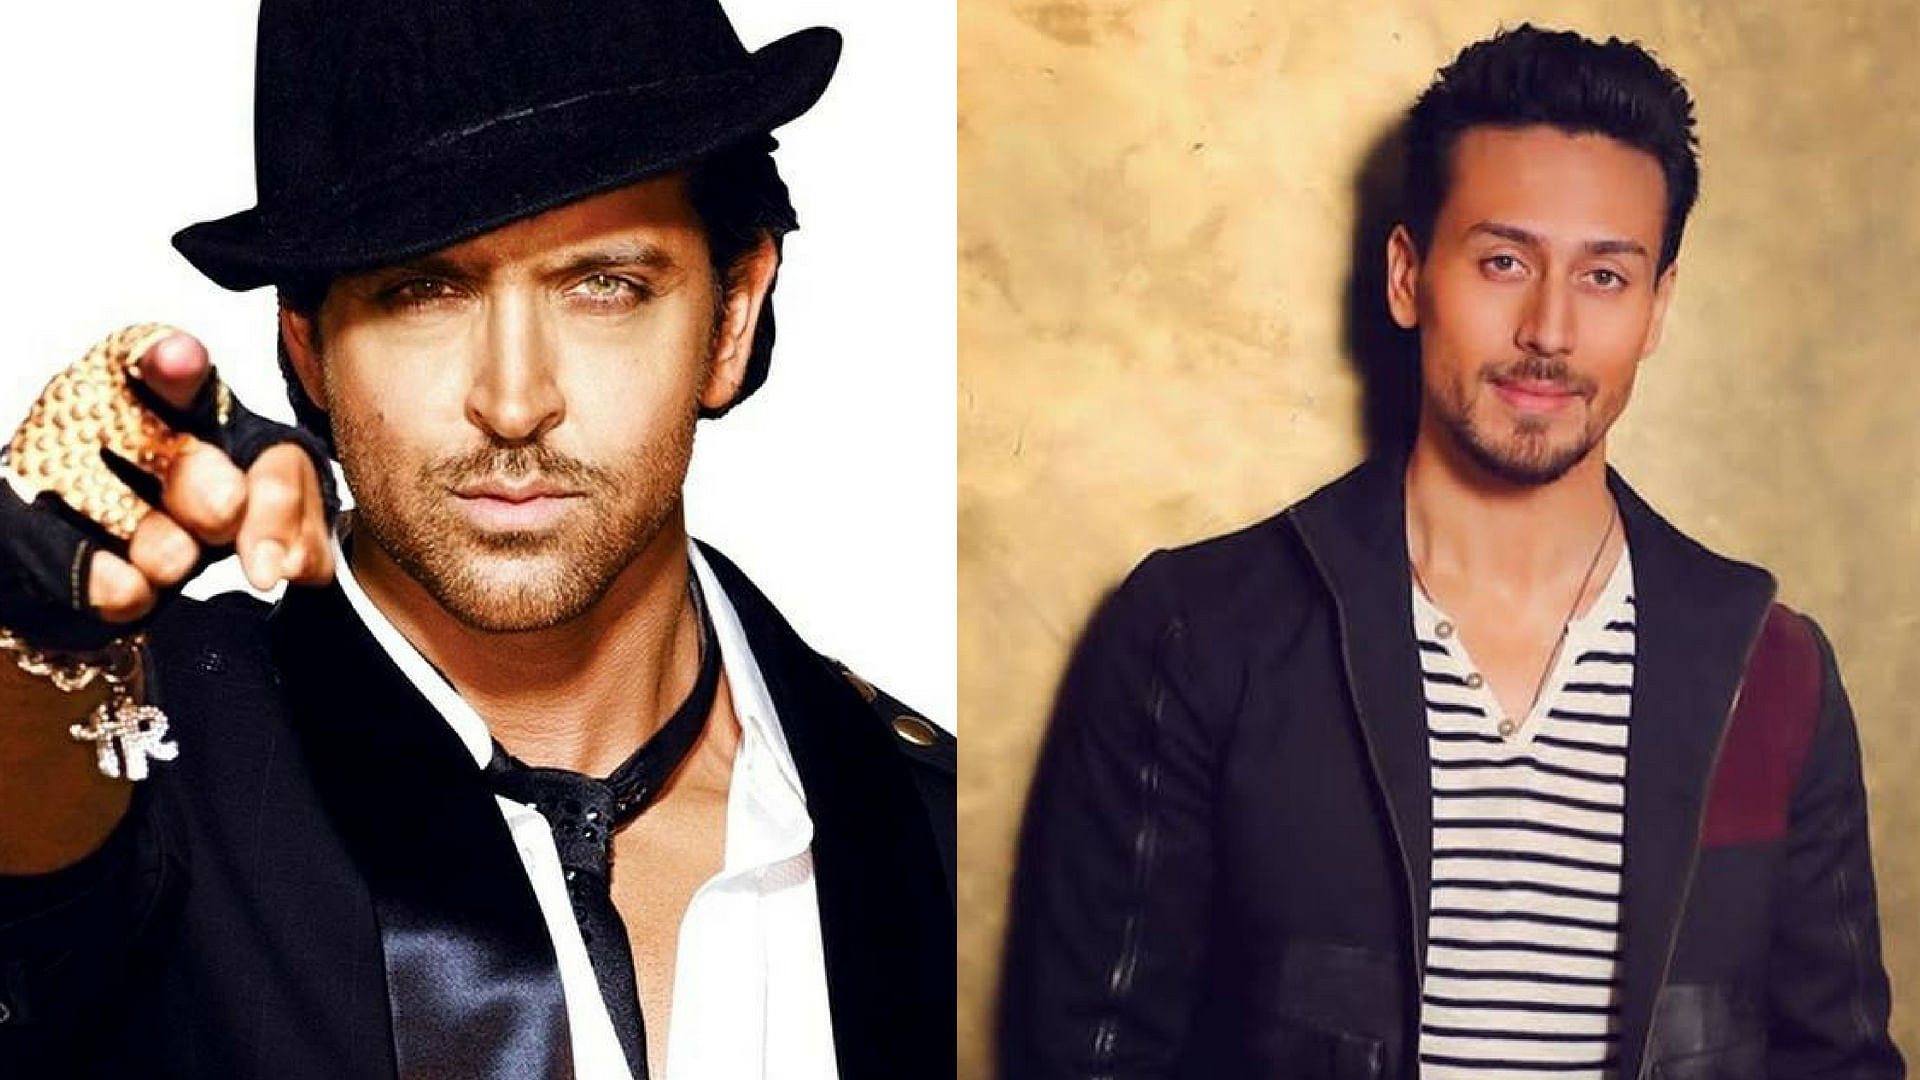 Hrithik Roshan and Tiger Shroff have joined the #HumFitTohIndiaFit campaign.